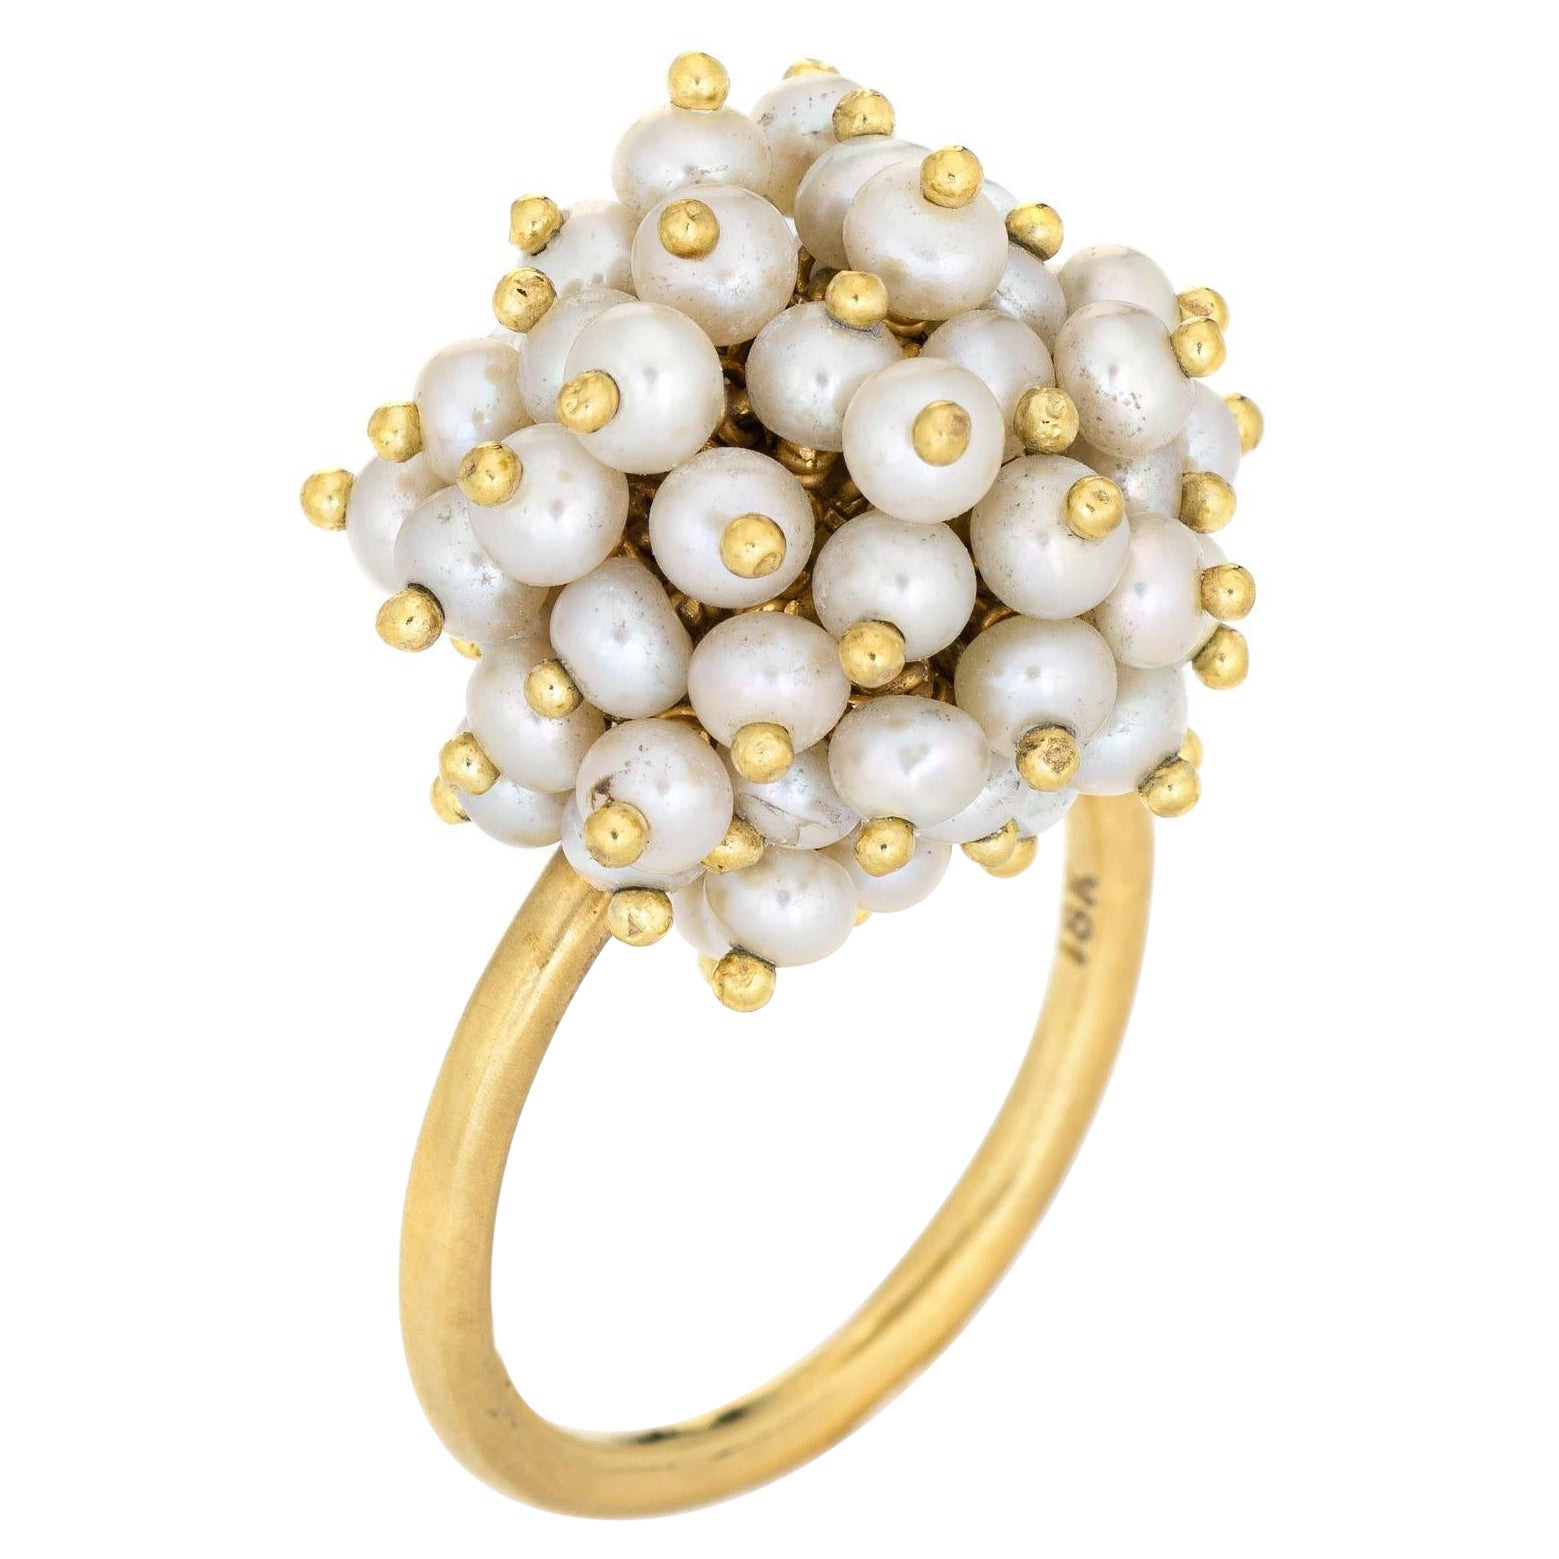 Me & Ro All Pearl Bead Ball Ring 18k Gold Estate Jewelry Cluster Orb Band